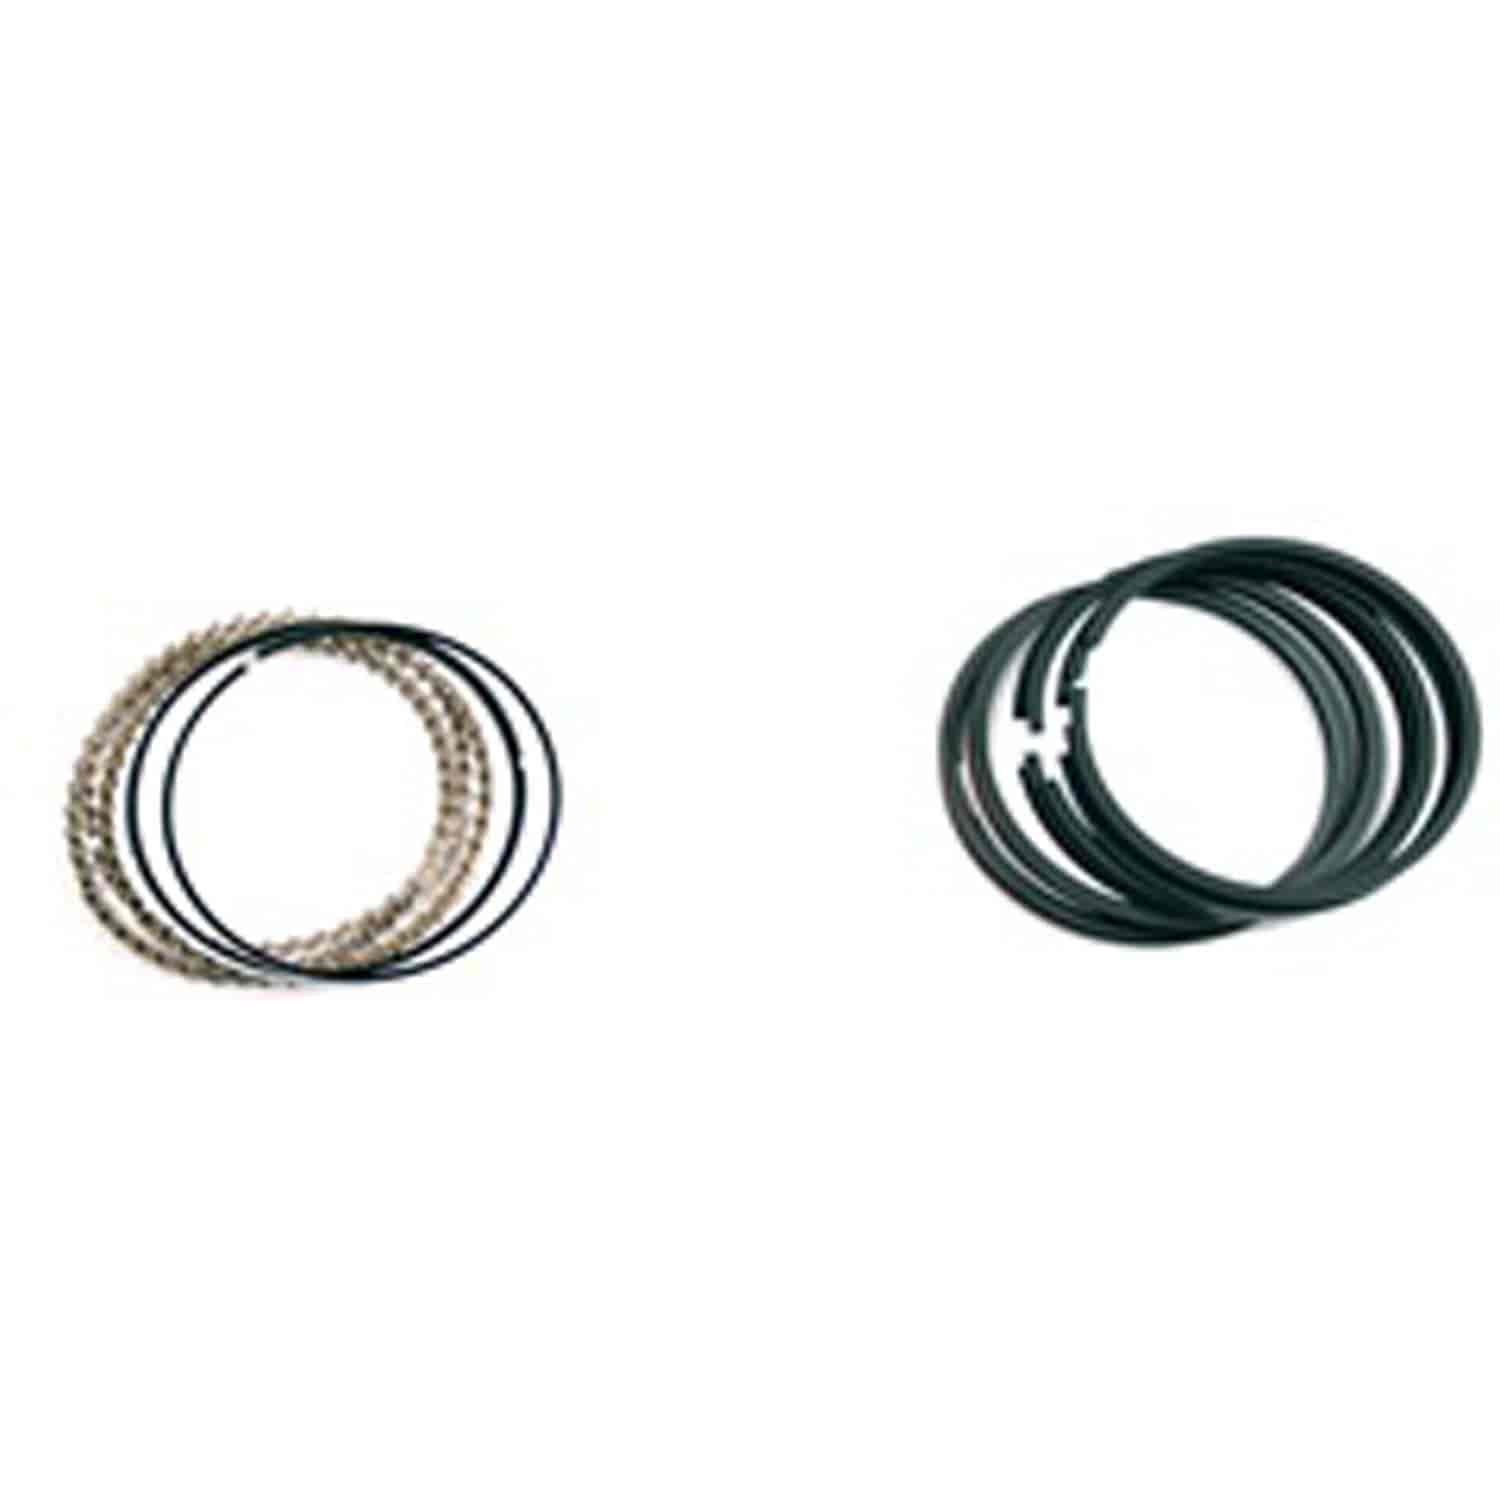 This piston ring set from Omix-ADA fits 4.7L engines that have been bored 0.10mm oversize. Fits 99-0